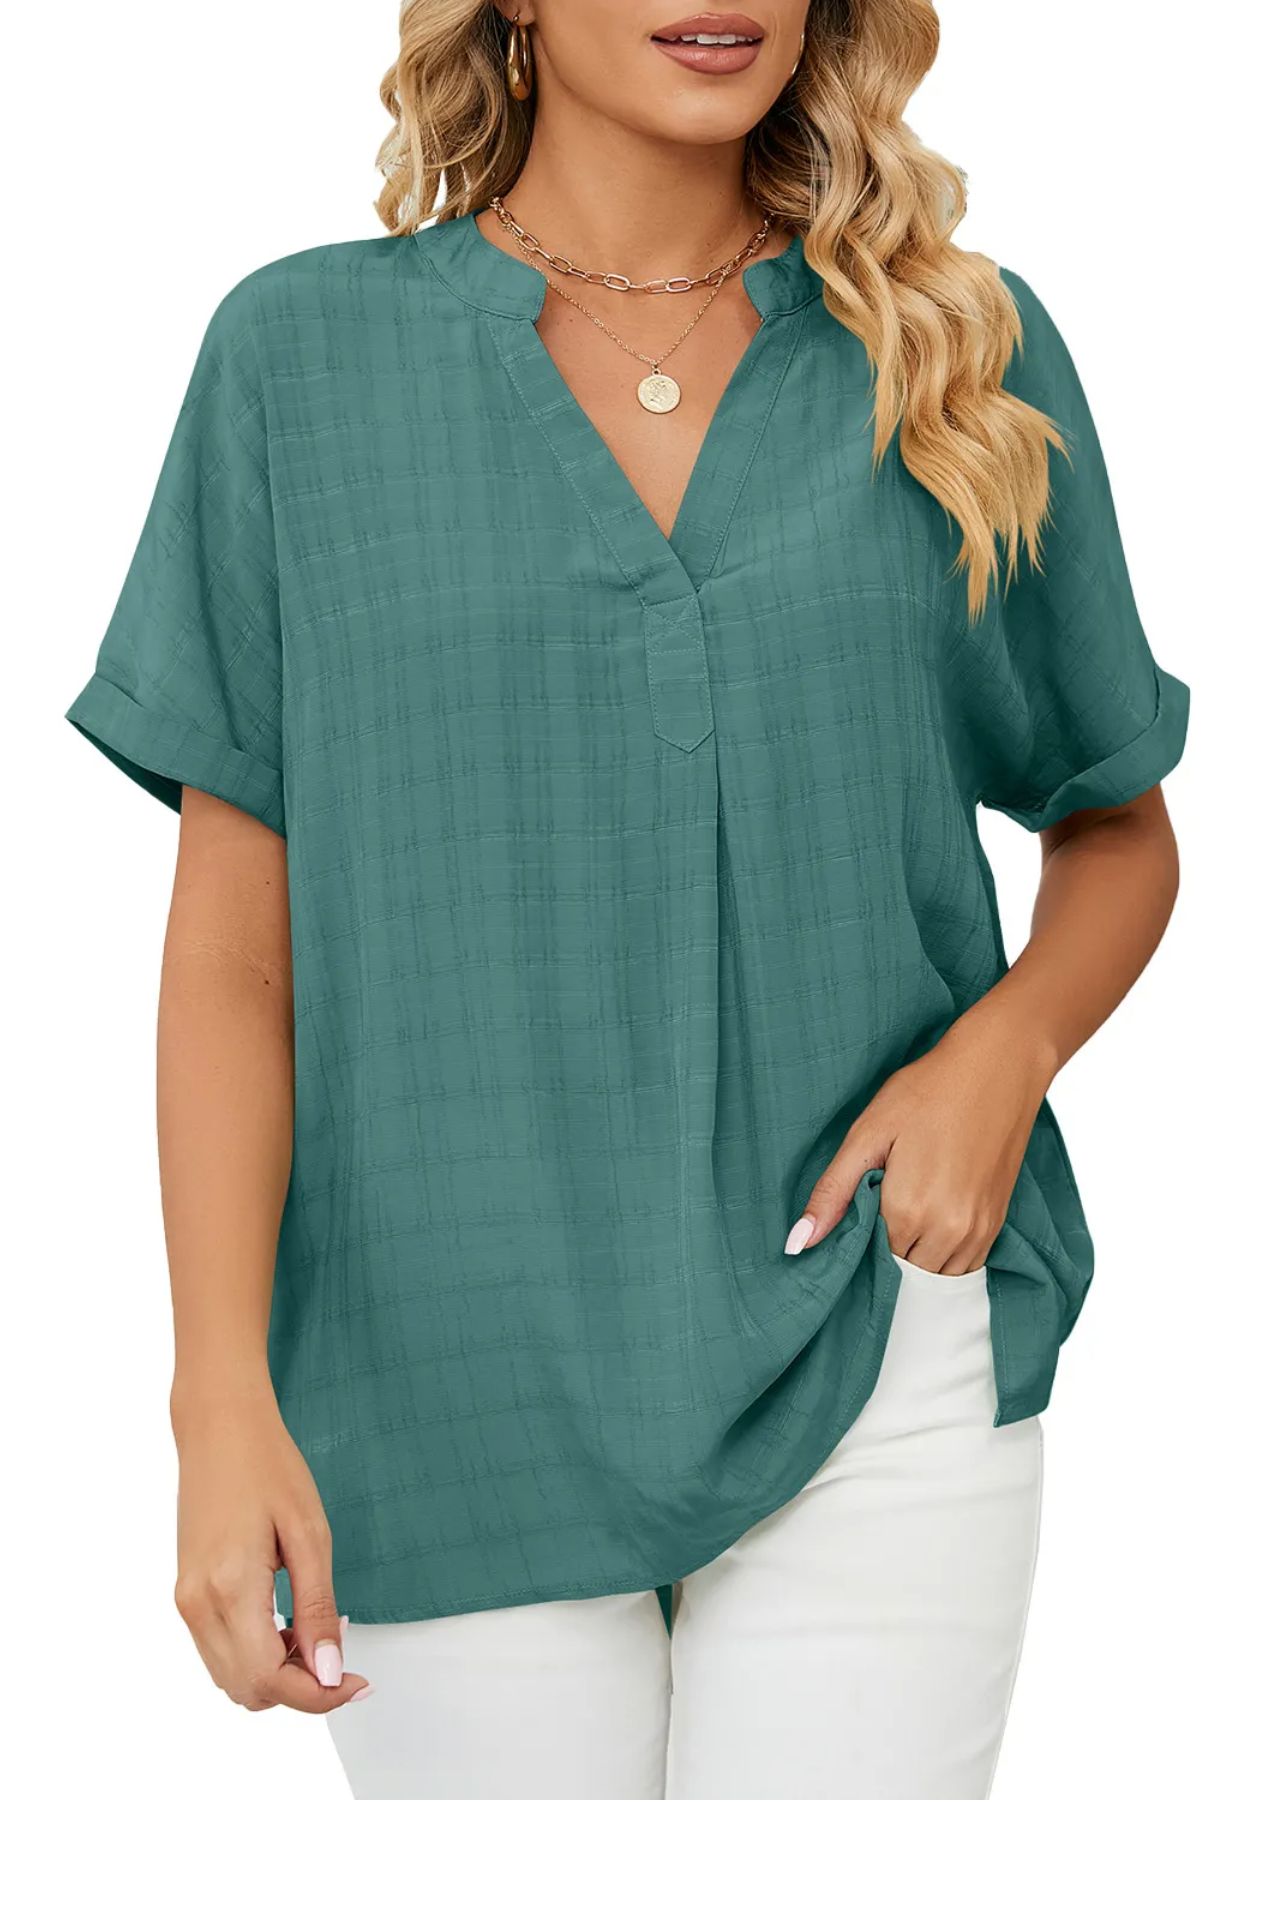 New Solid Color V-neck Casual Pullover Shirt Top